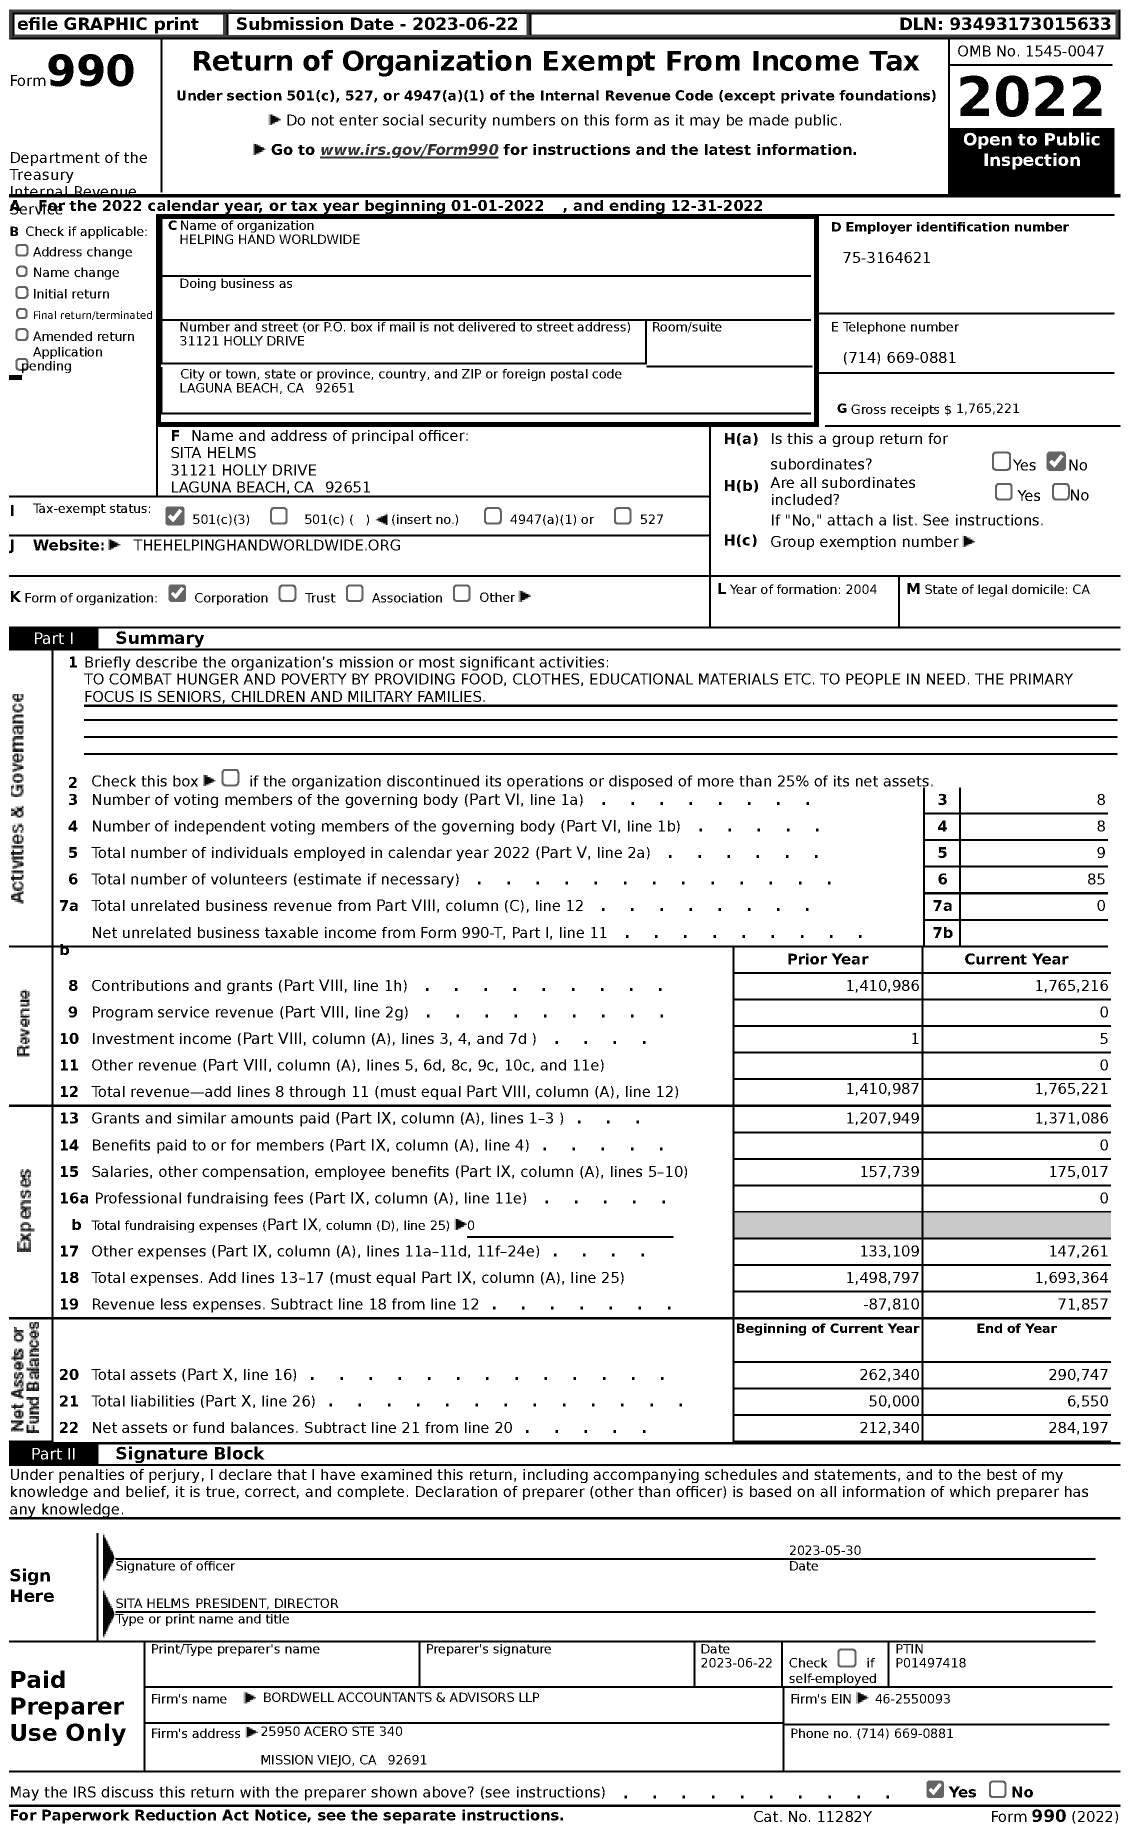 Image of first page of 2022 Form 990 for Helping Hand Worldwide